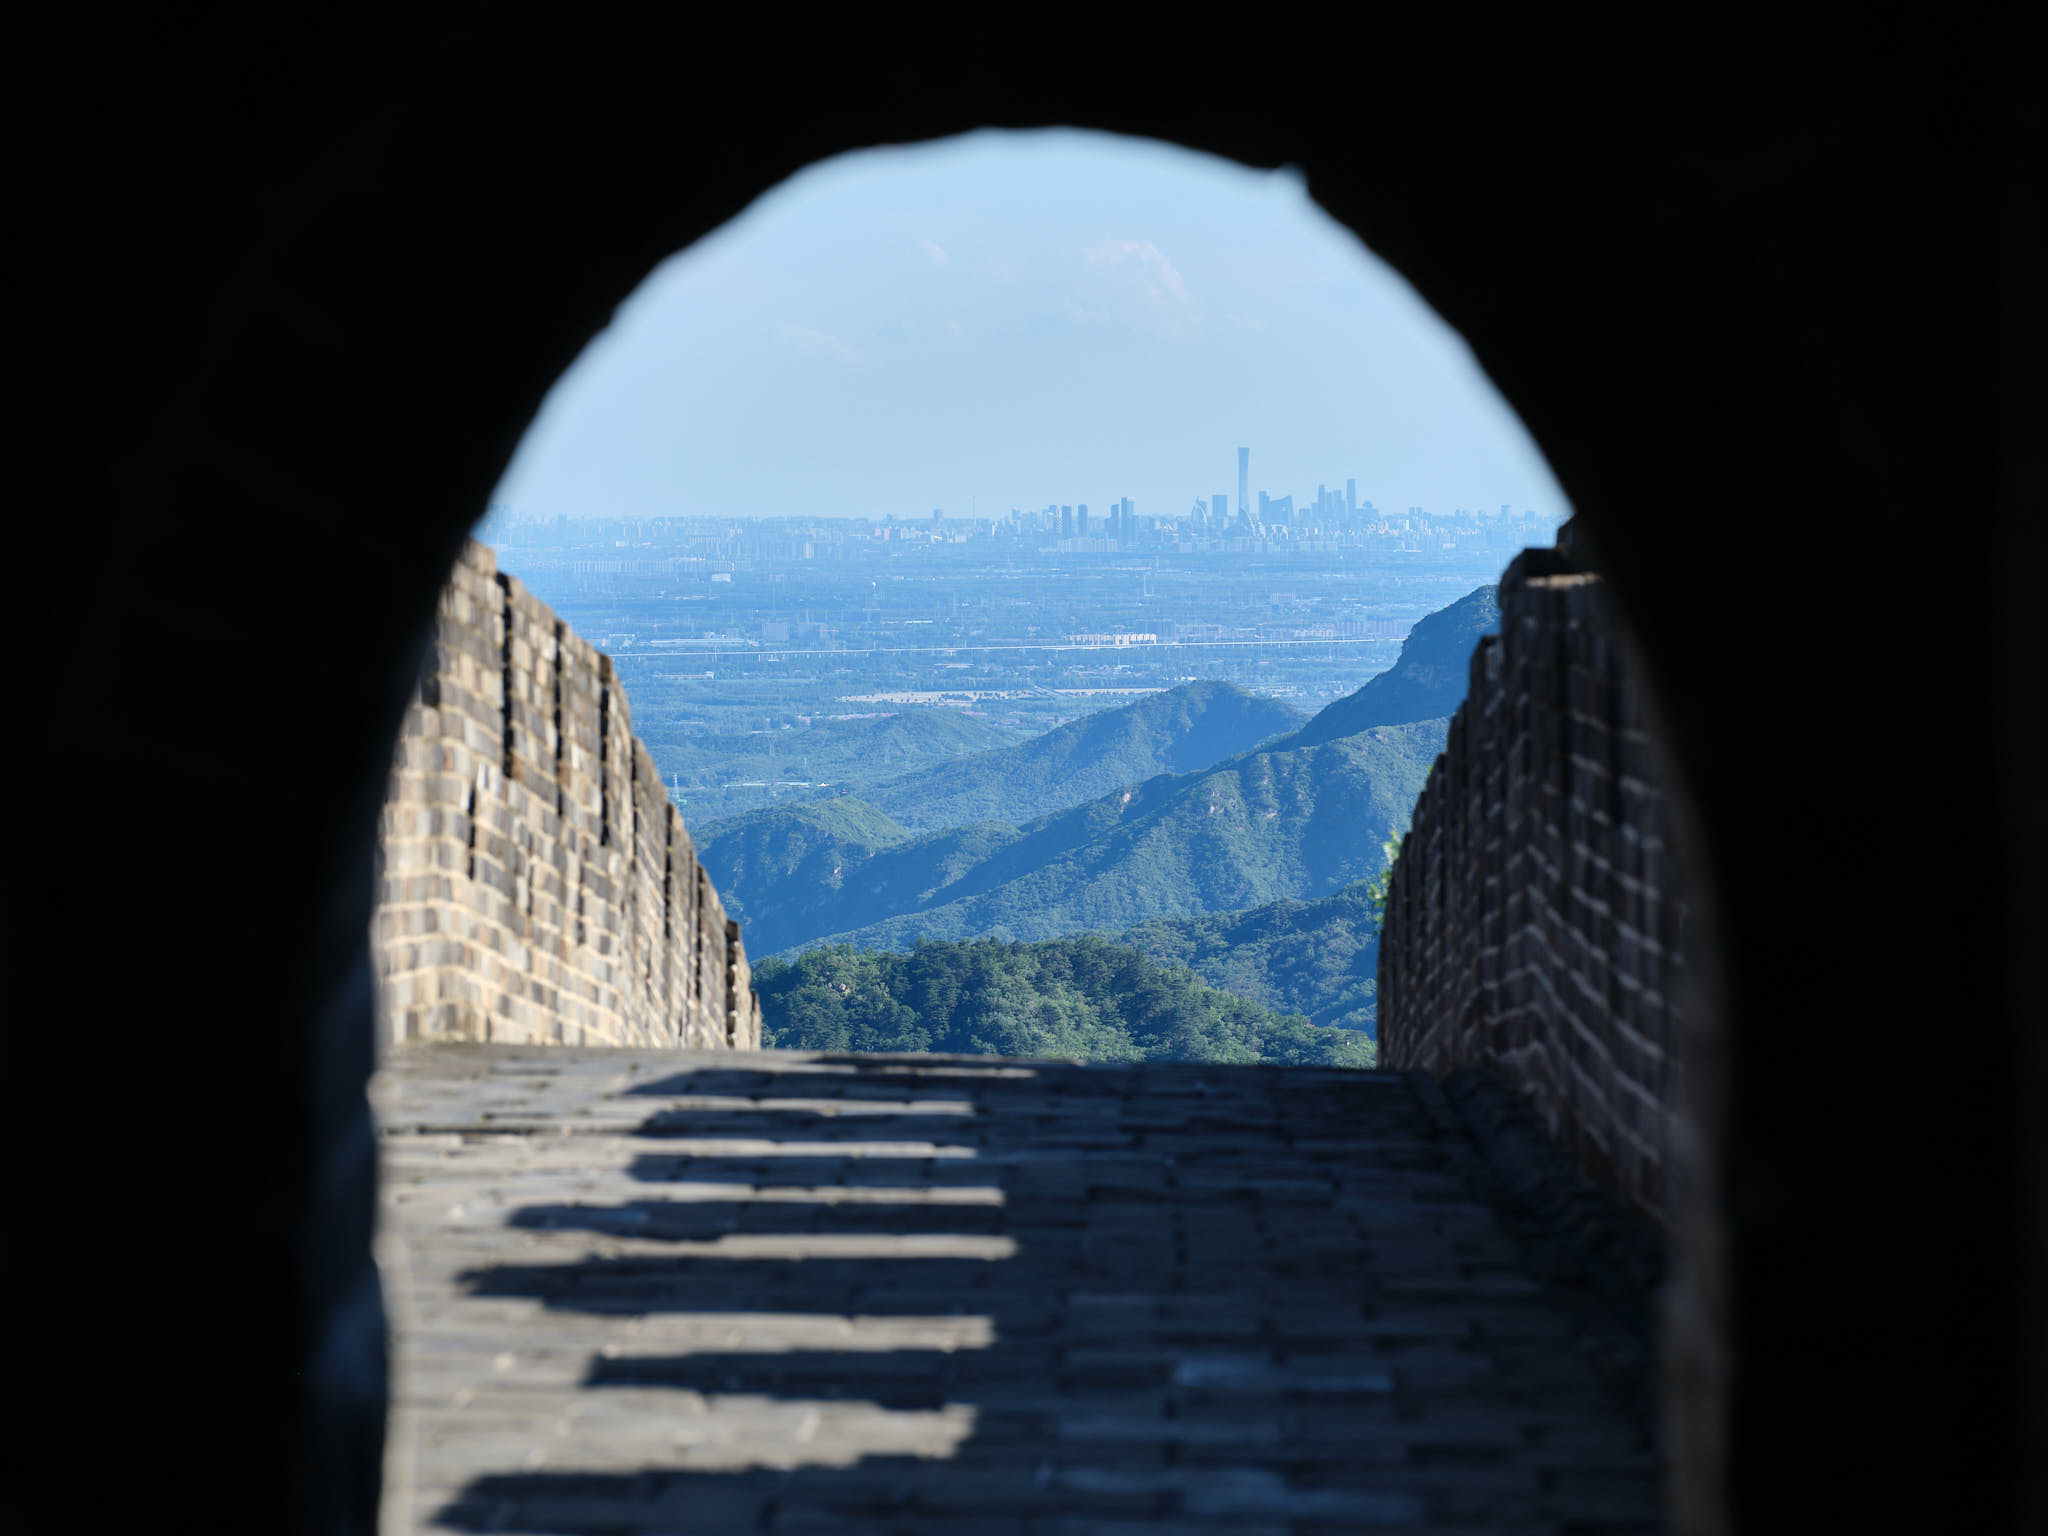 View of Beijing city through a watch tower at Mutianyu section of Great Wall of China